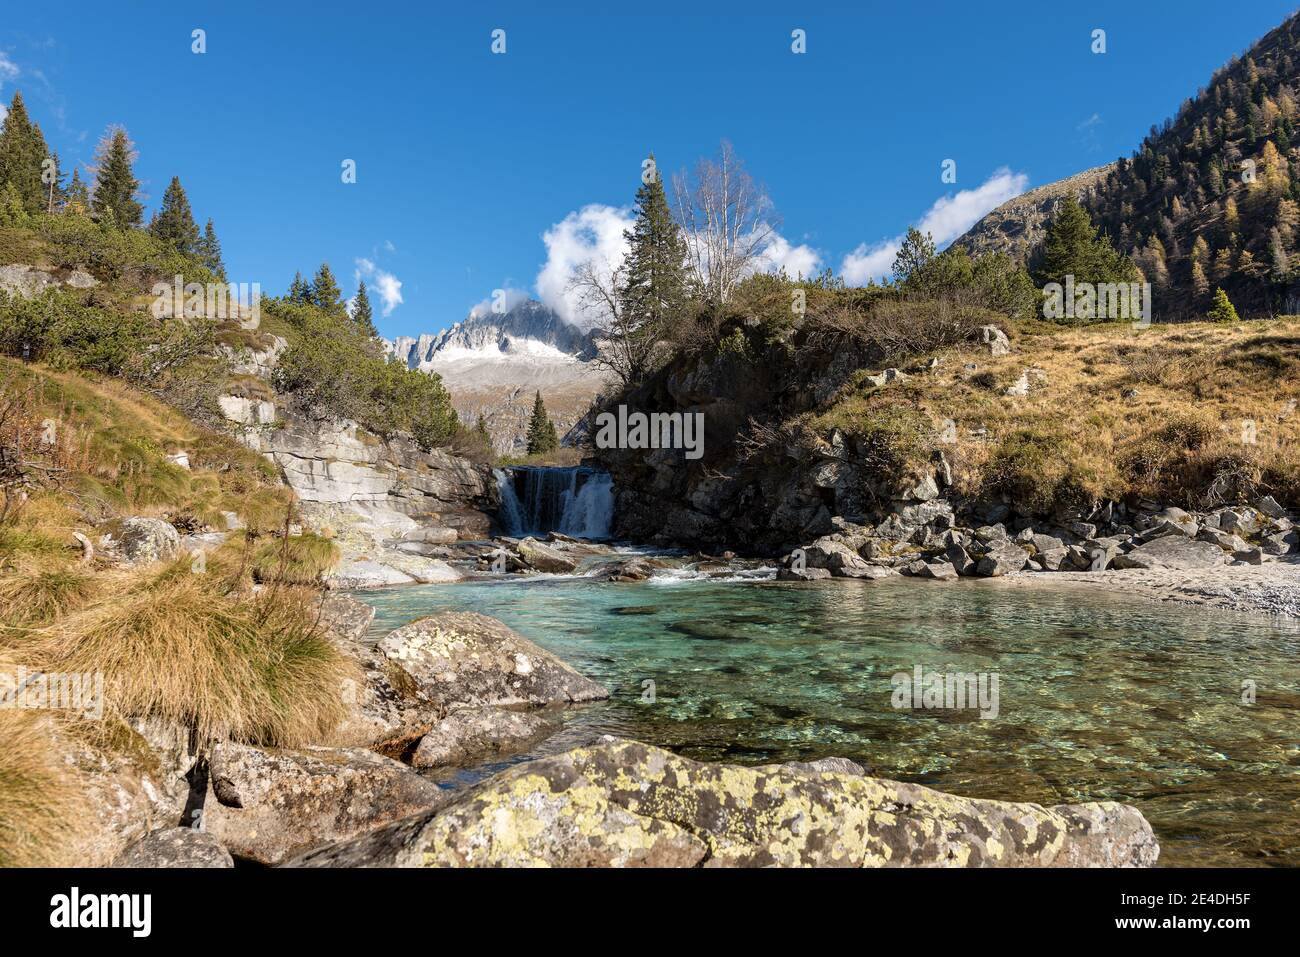 Peak of Care Alto (3462 m) and Chiese river in the National Park of Adamello Brenta seen from the Val di Fumo. Trentino Alto Adige, Italy, Europe Stock Photo